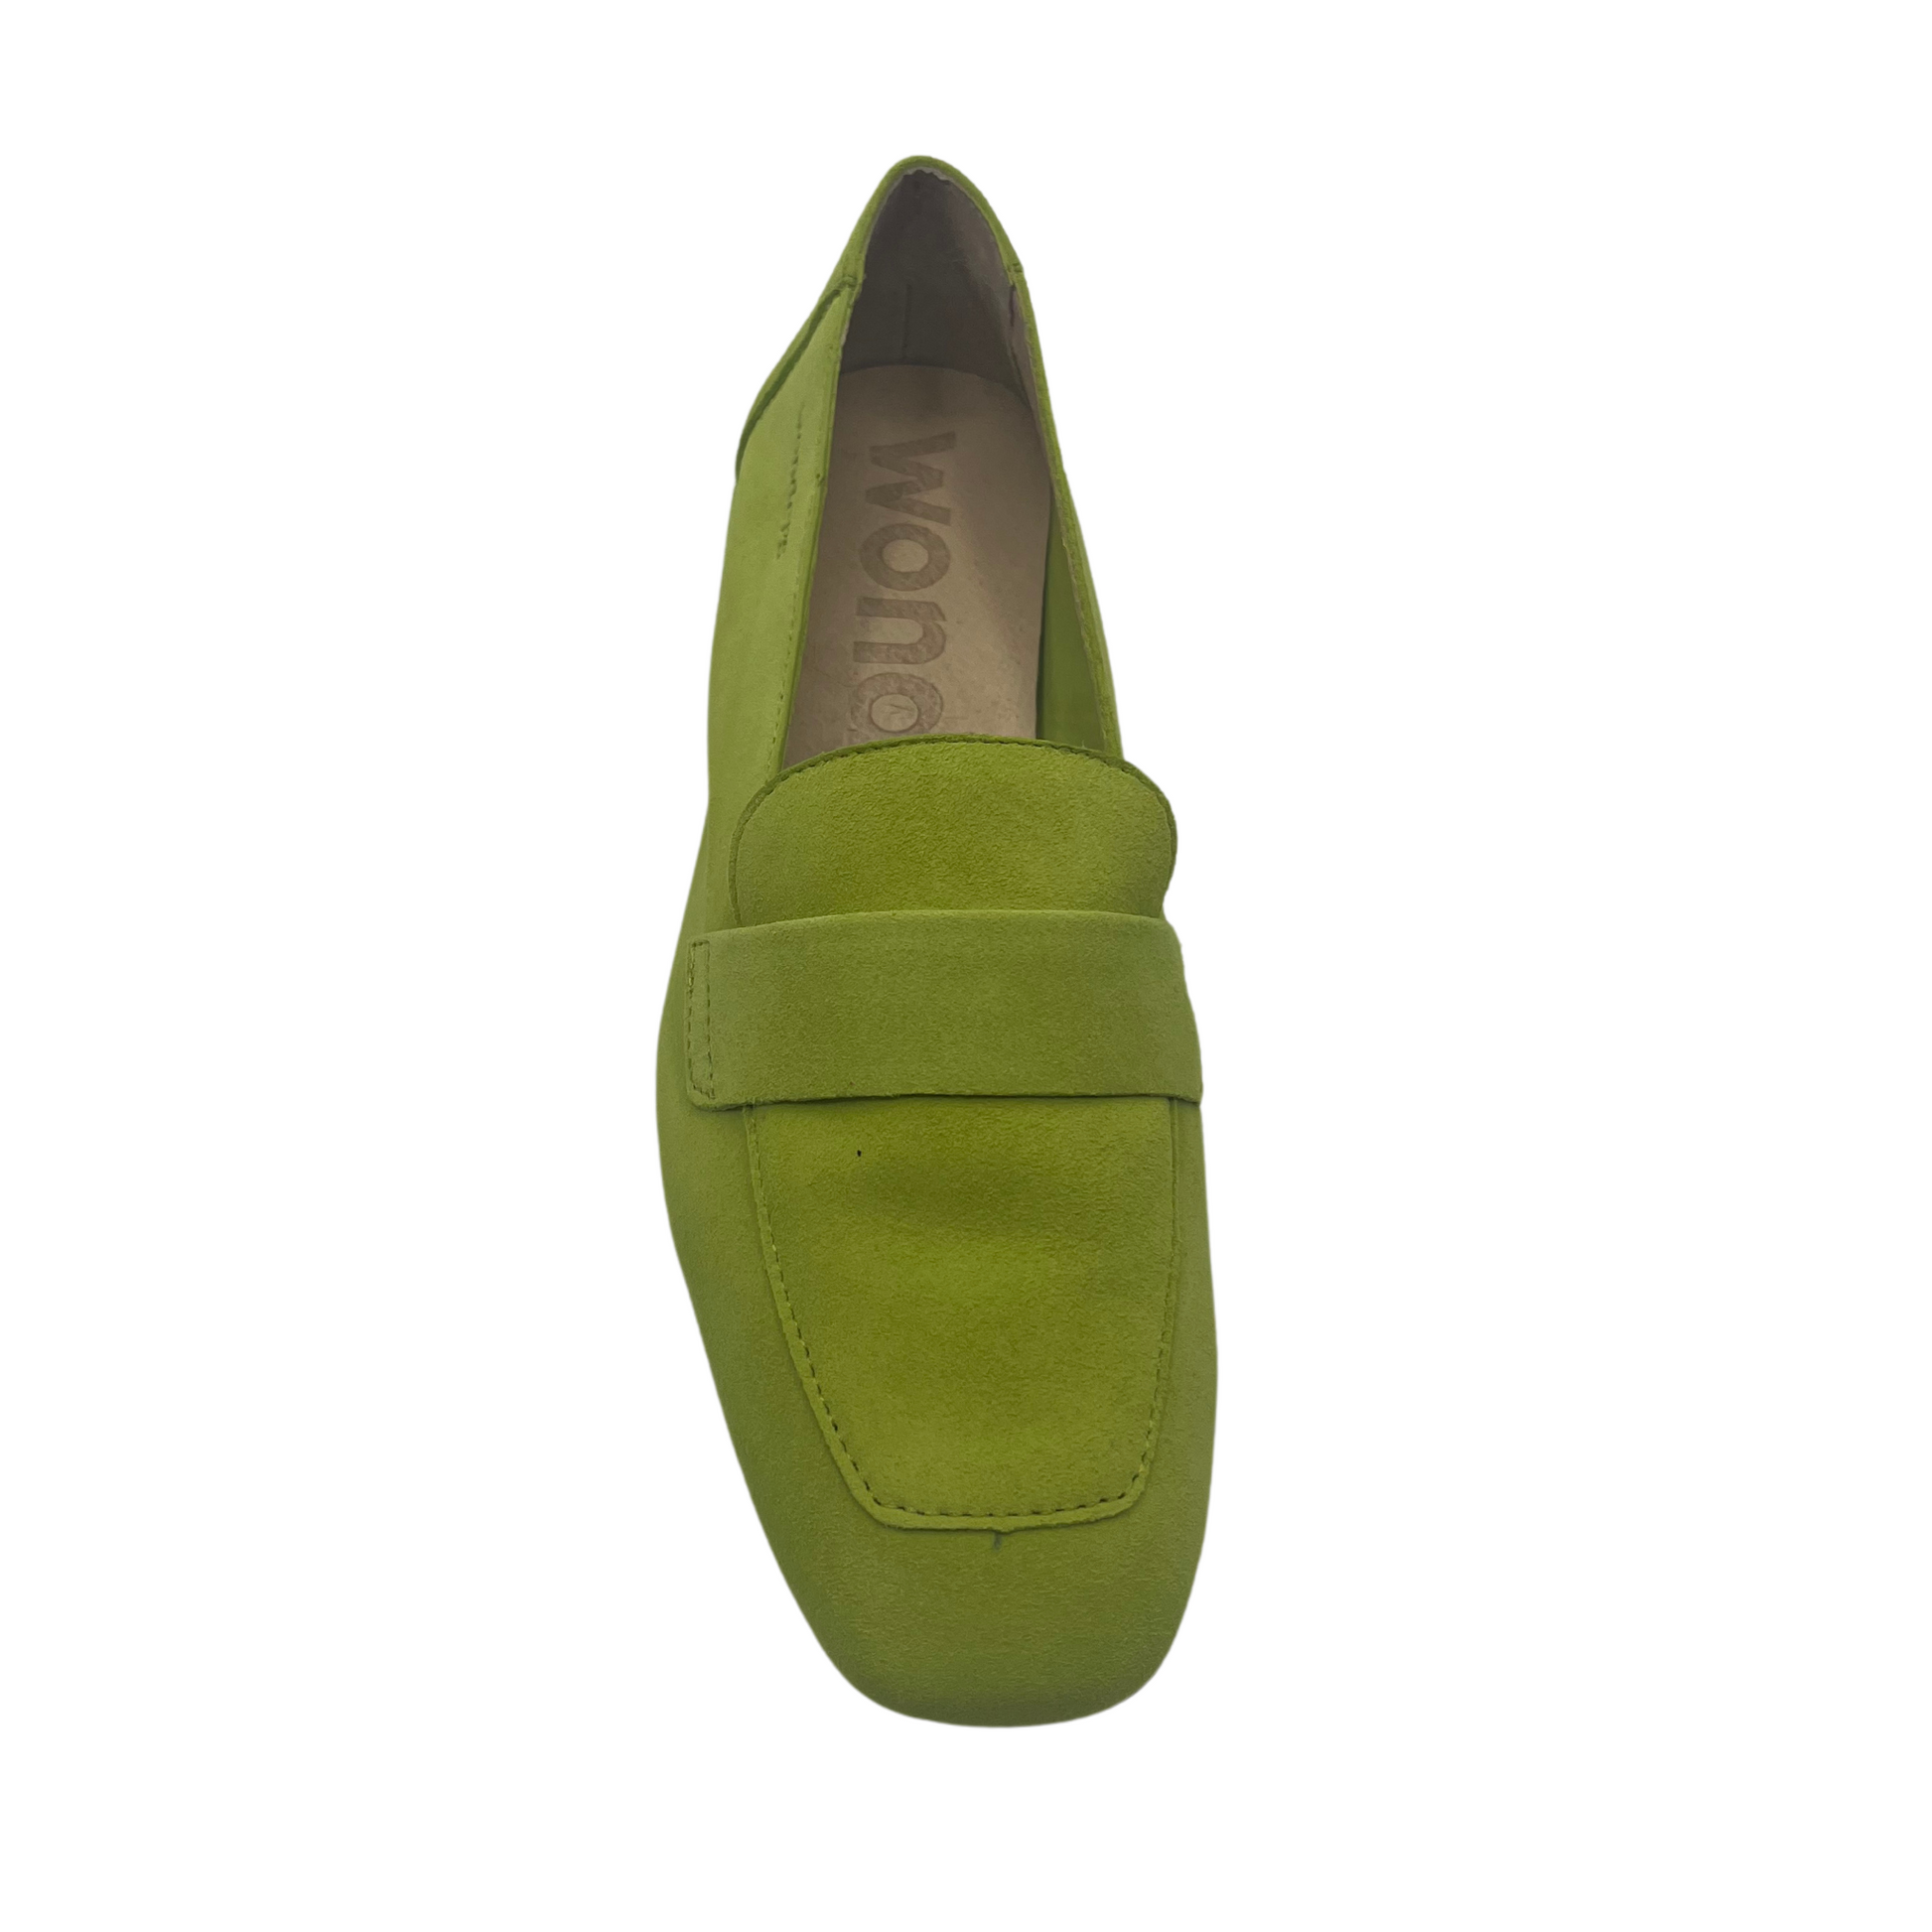 Top view of apple green suede leather loafer with square toe